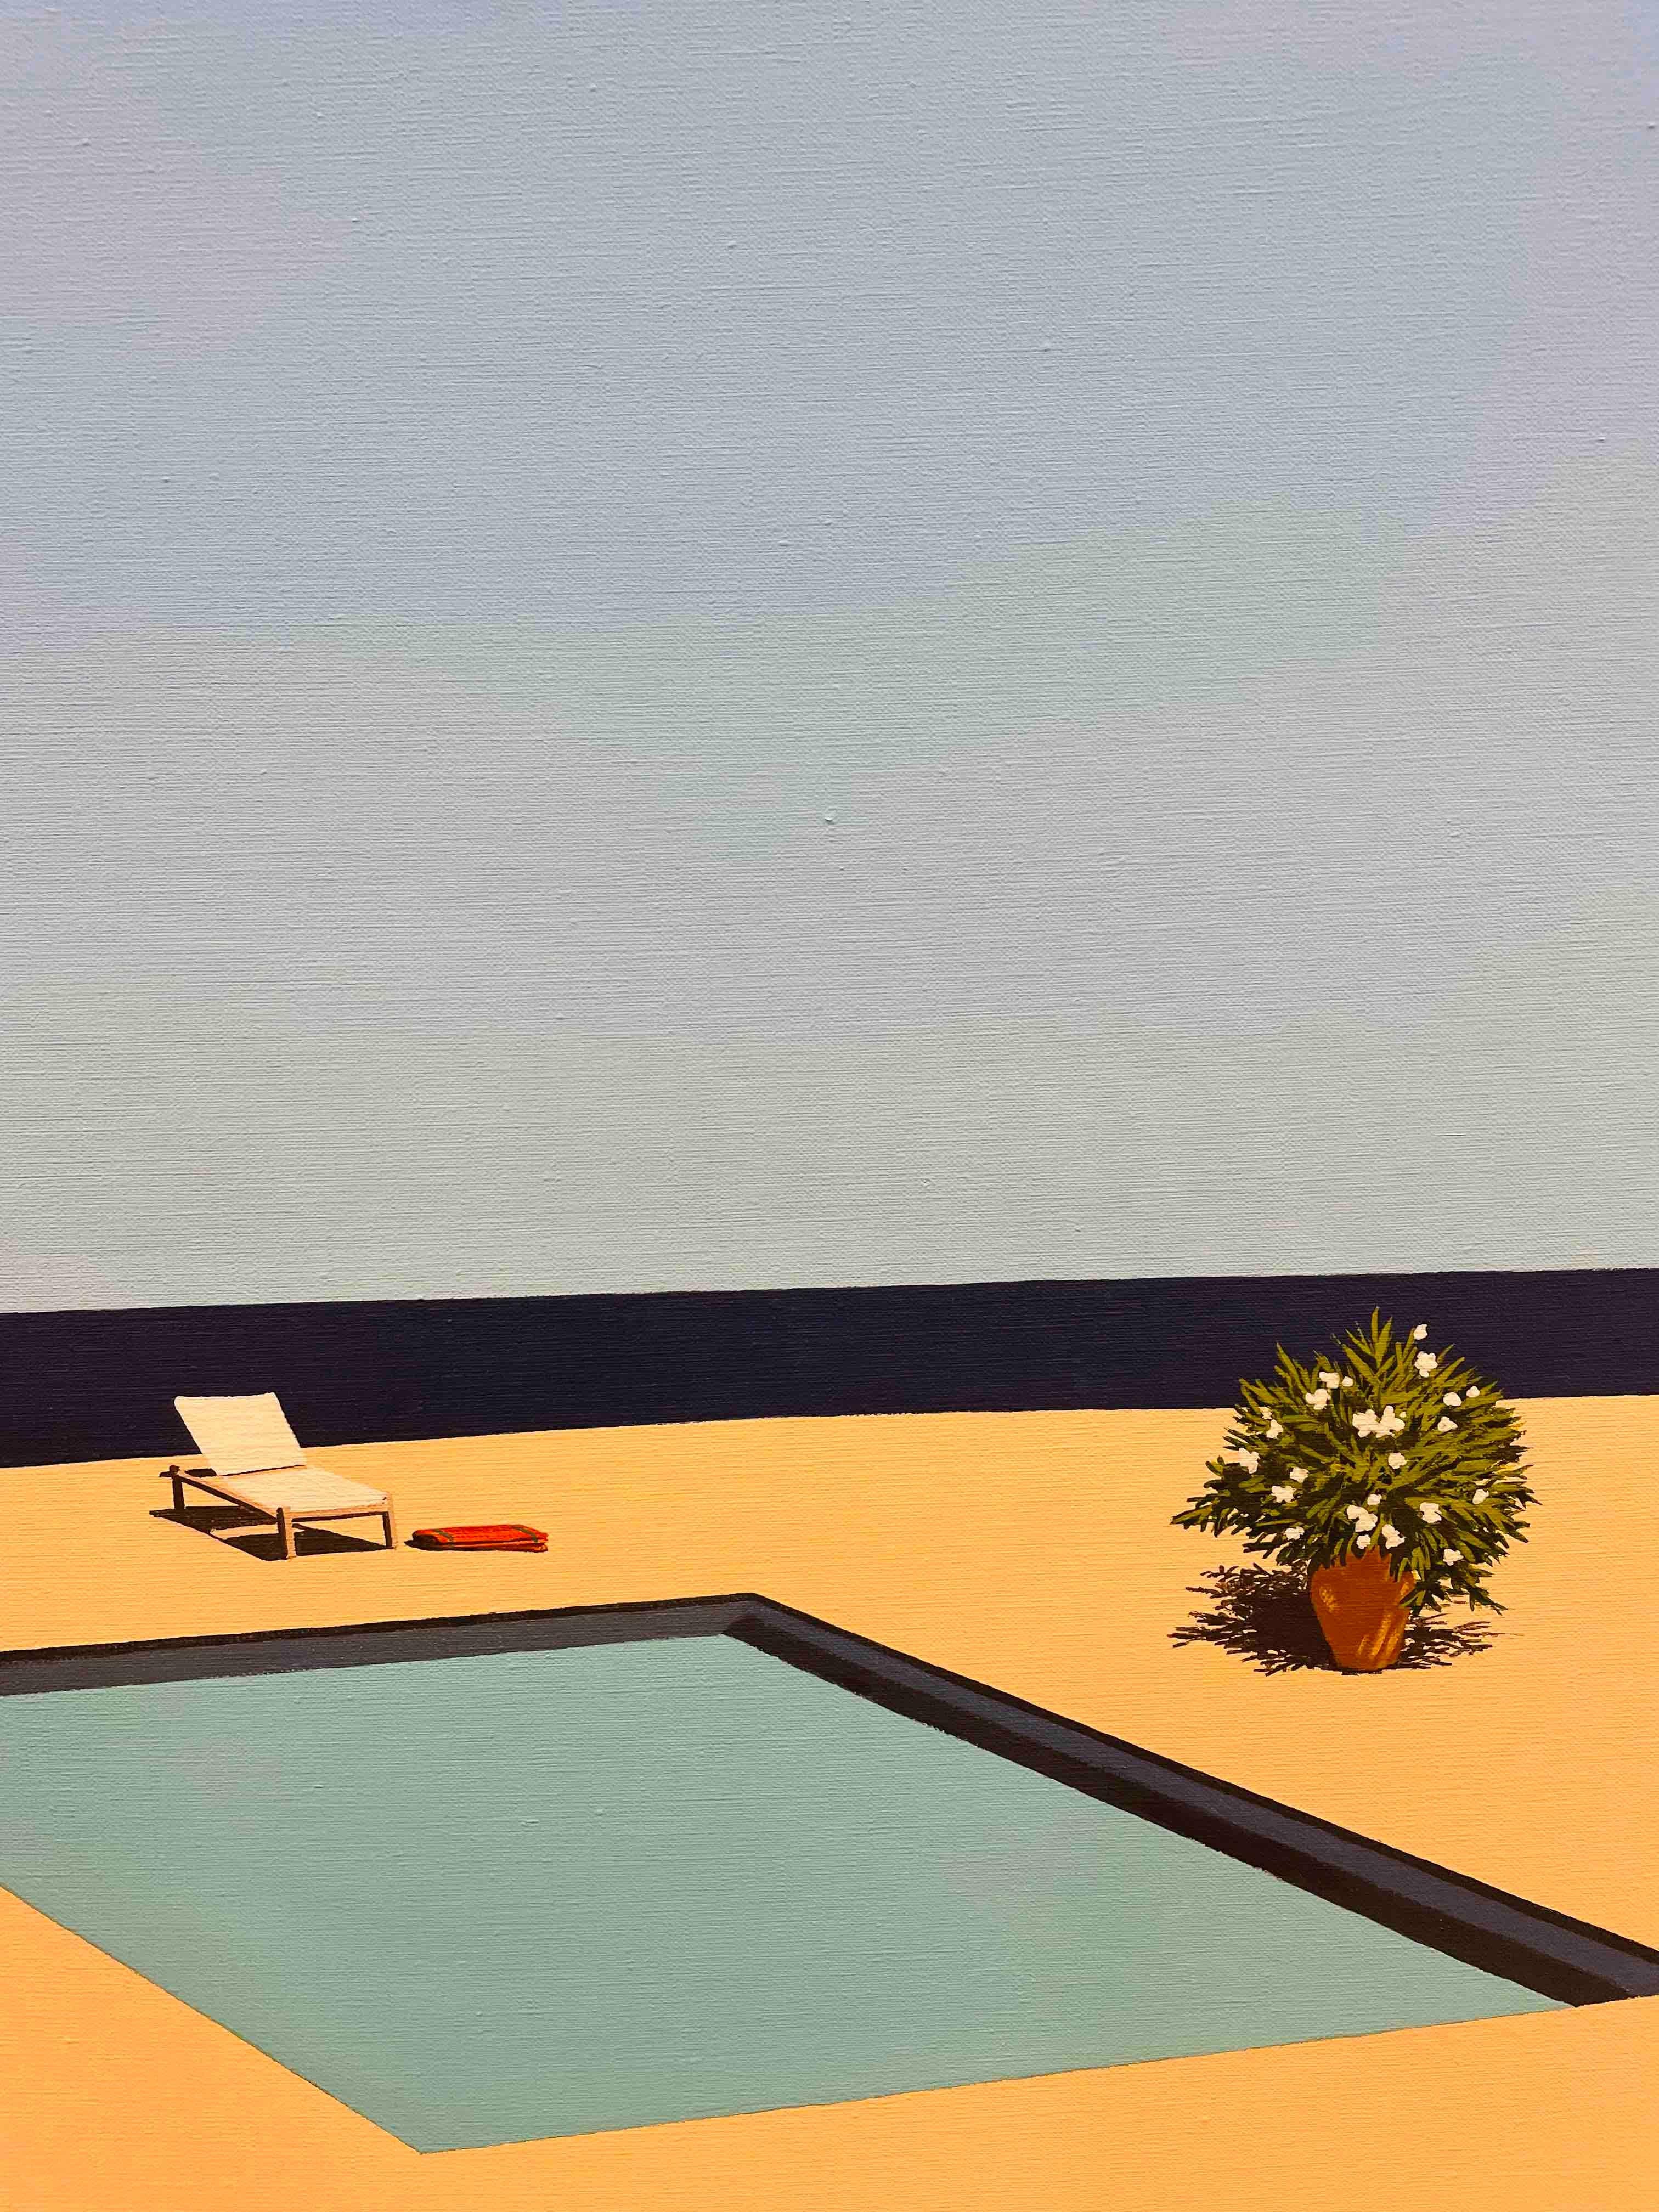 A pool with a view - landscape painting 1